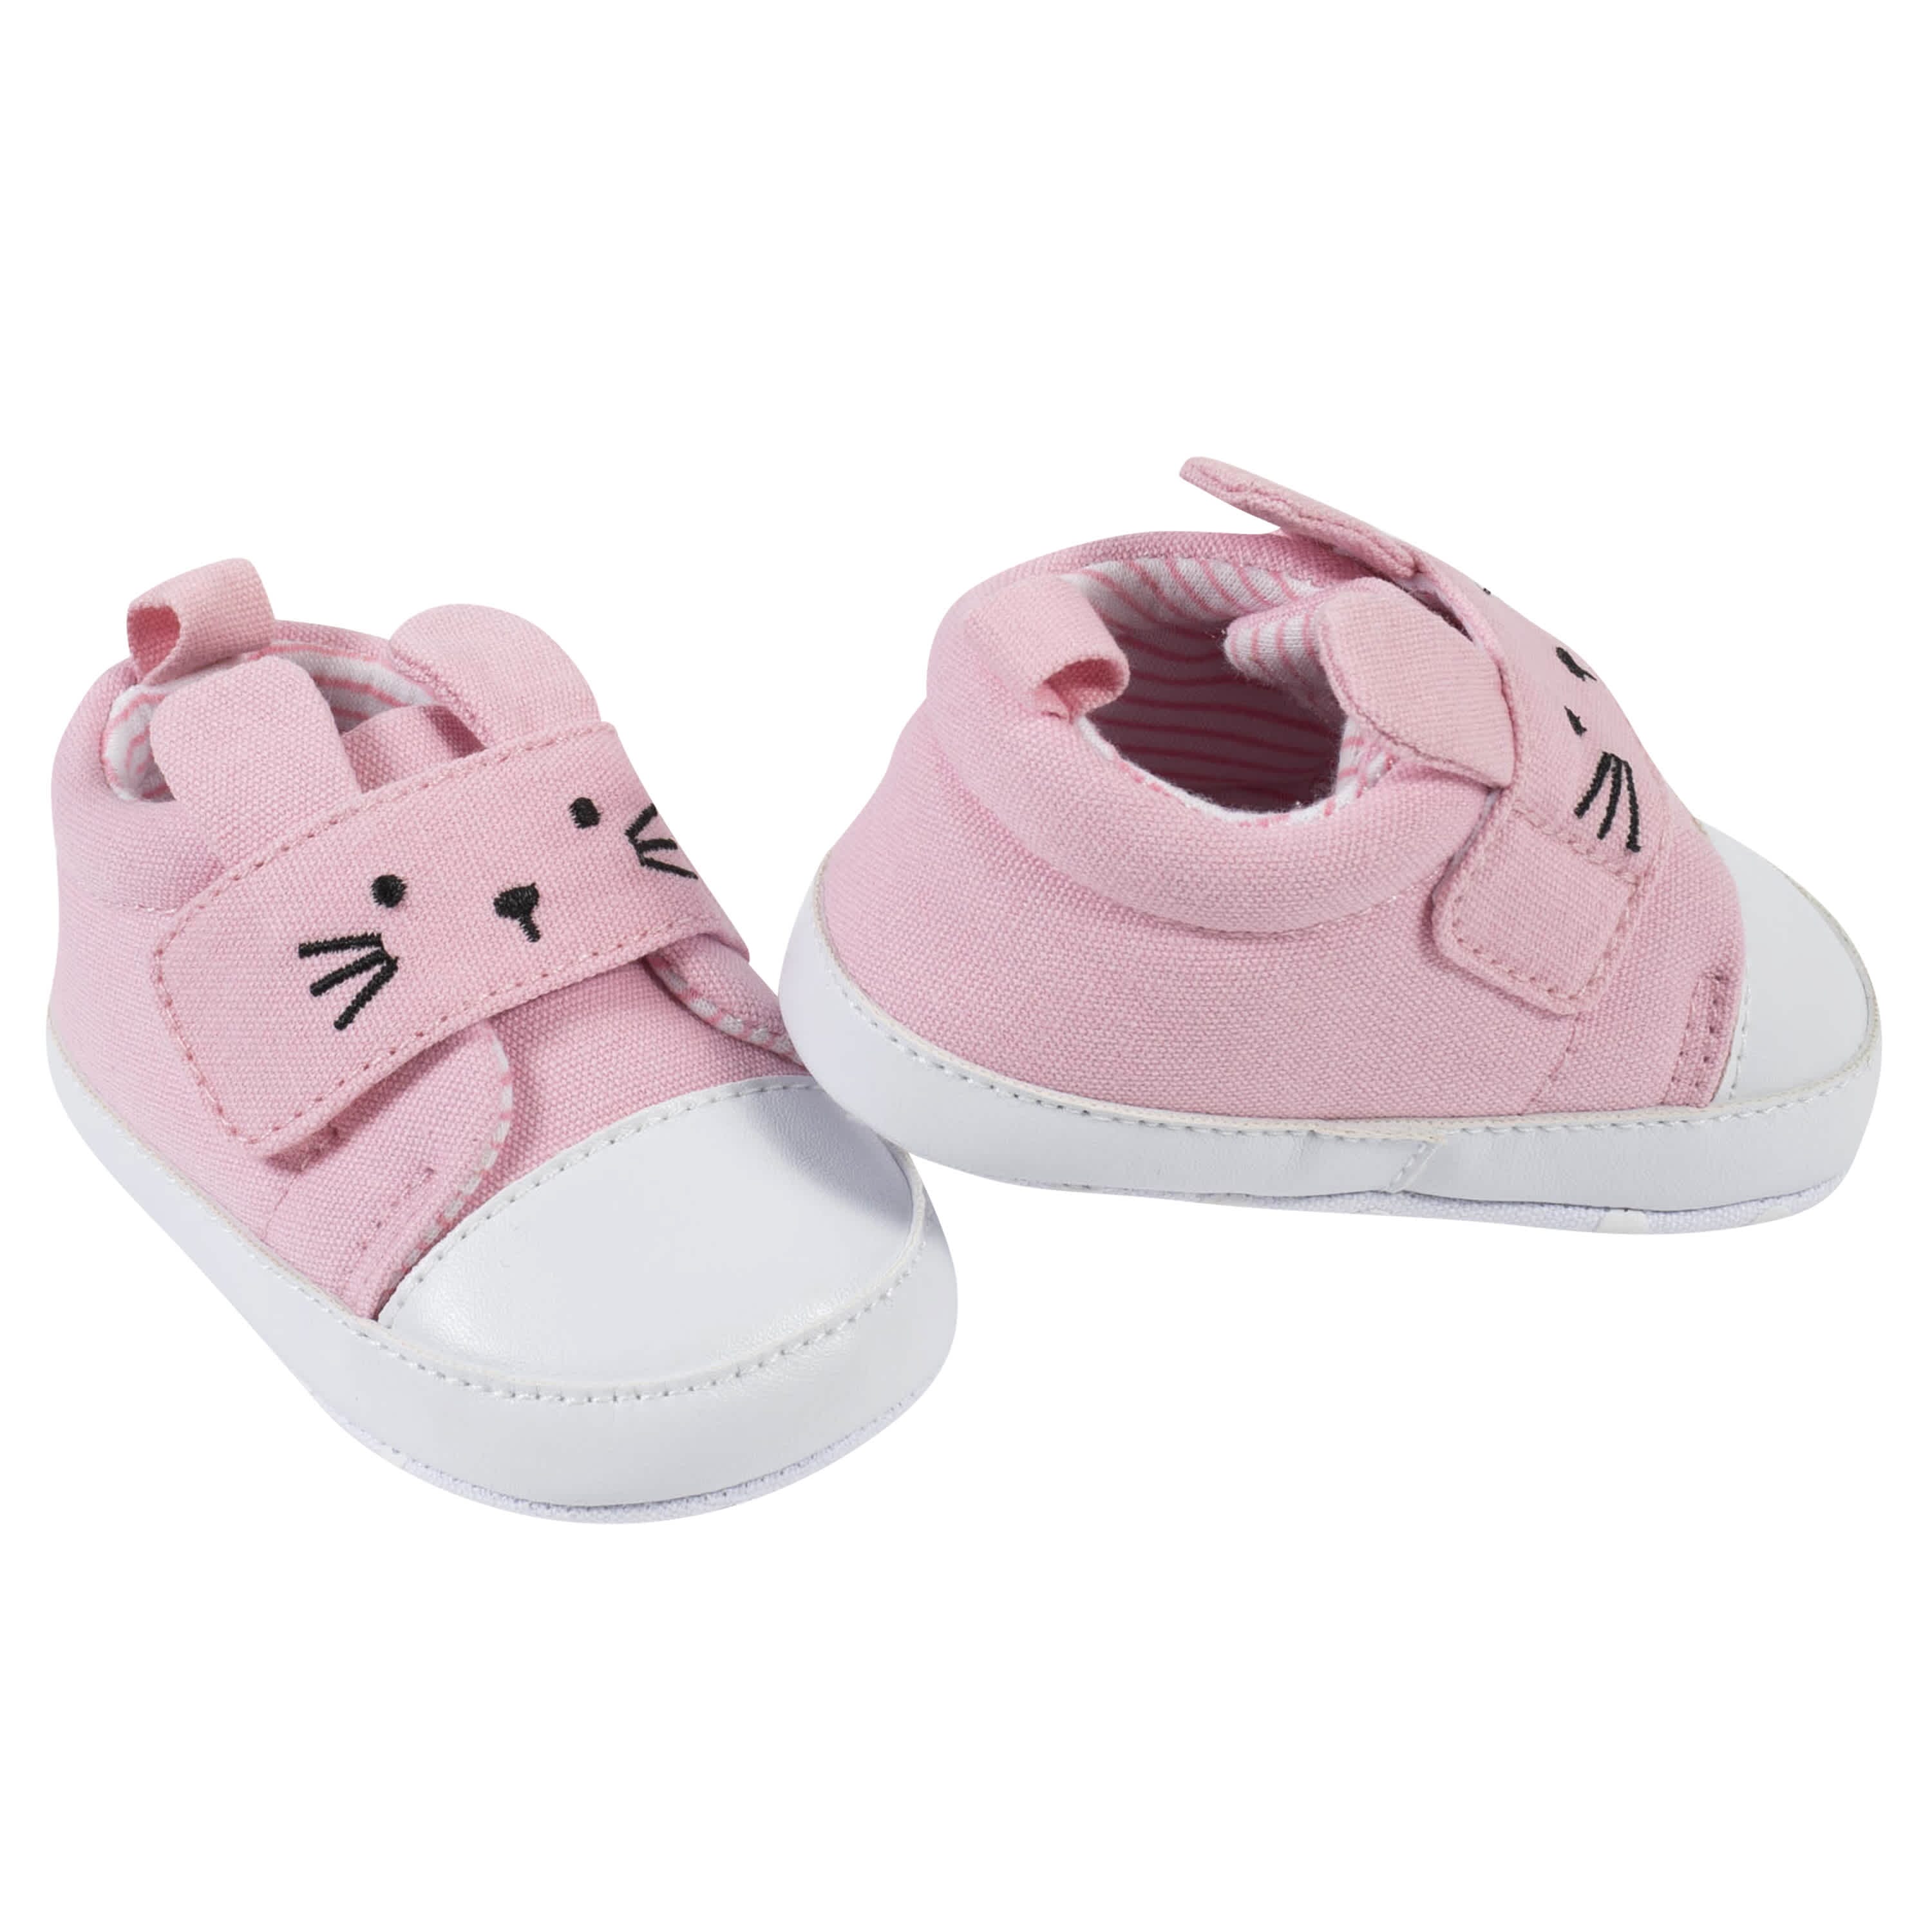 Non Slip Booties for Babies | Baby Shoes | Get Up to 60% off